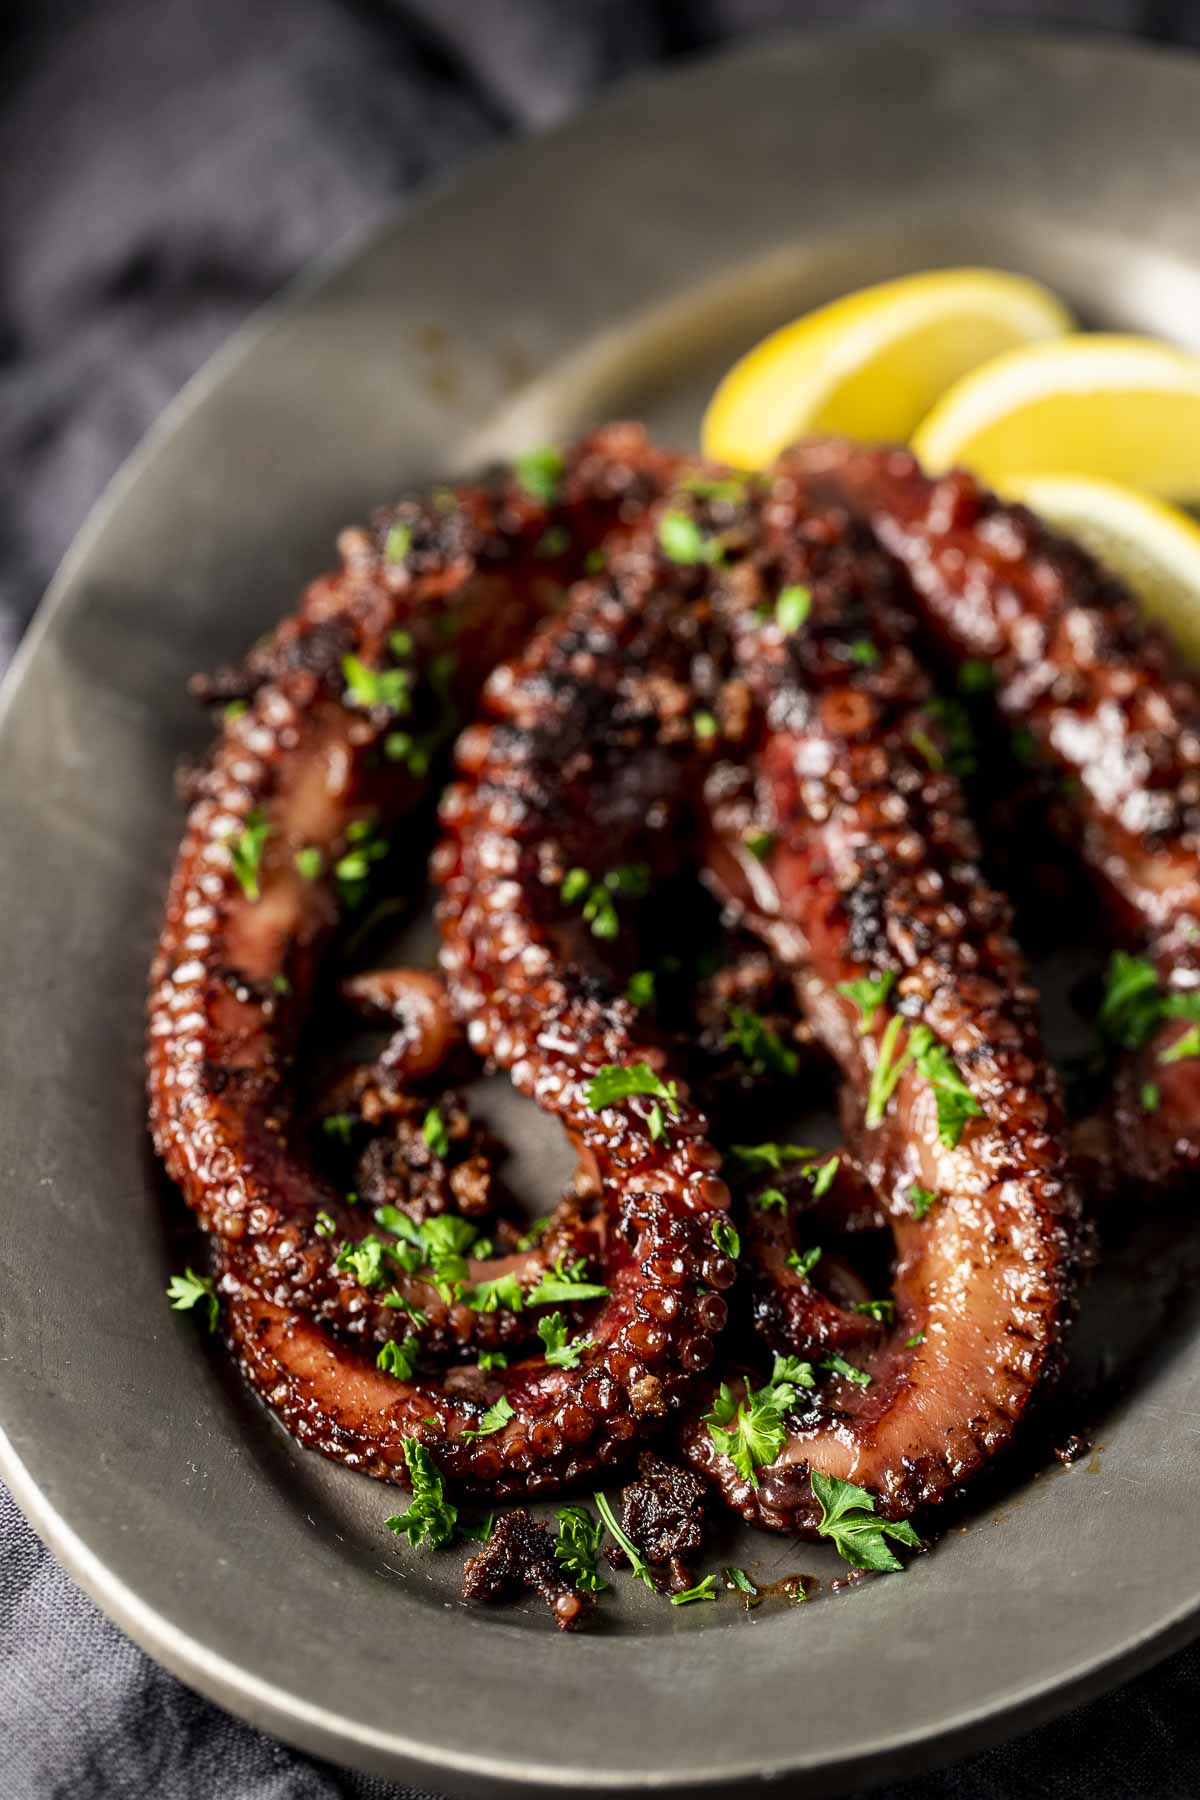 Octopus topped with chopped herbs on a grey plate with lemon wedges.